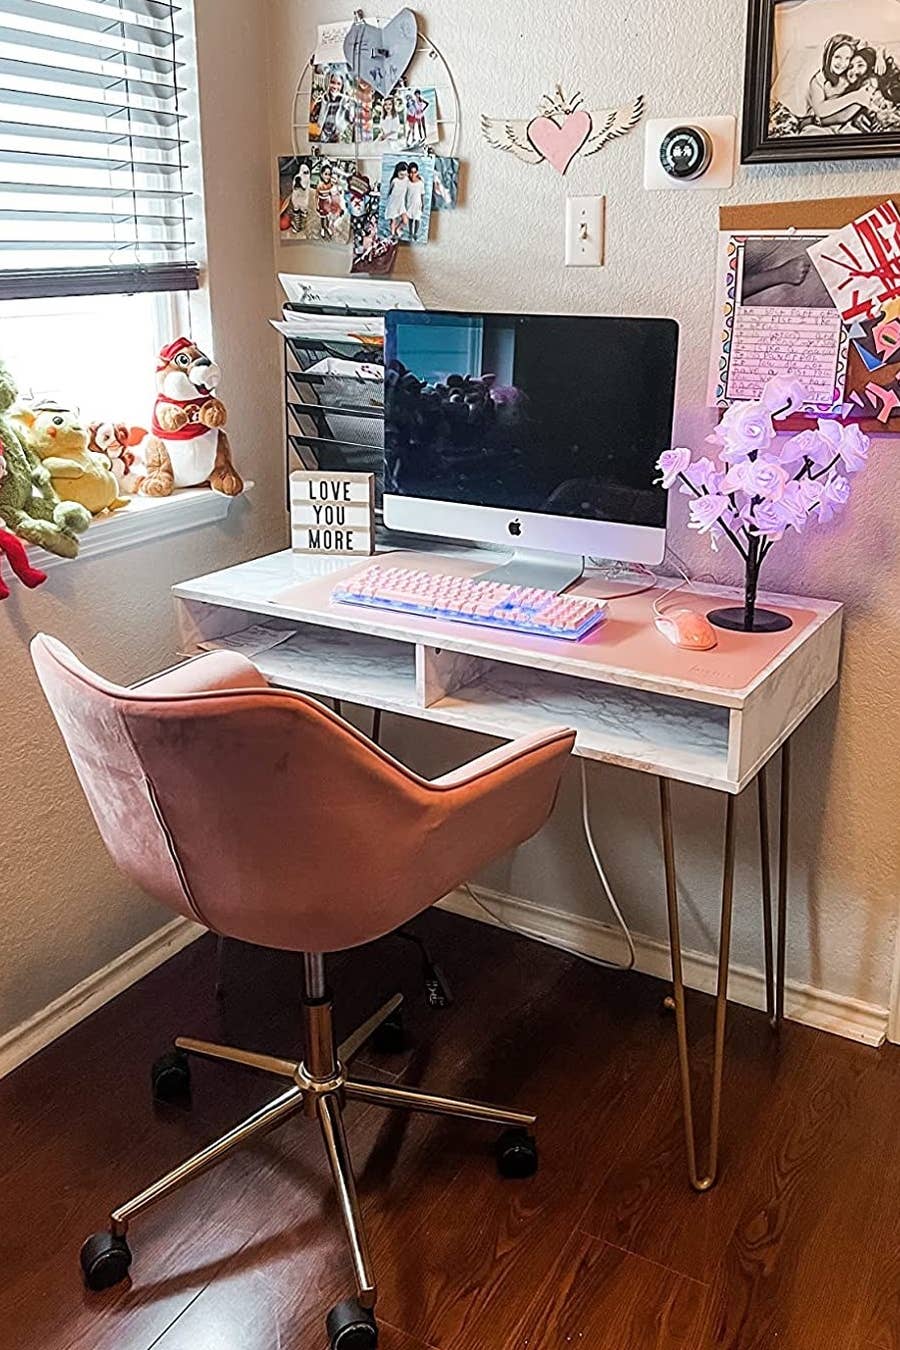 5 Ideas For Setting Up a Desk in Your Bedroom